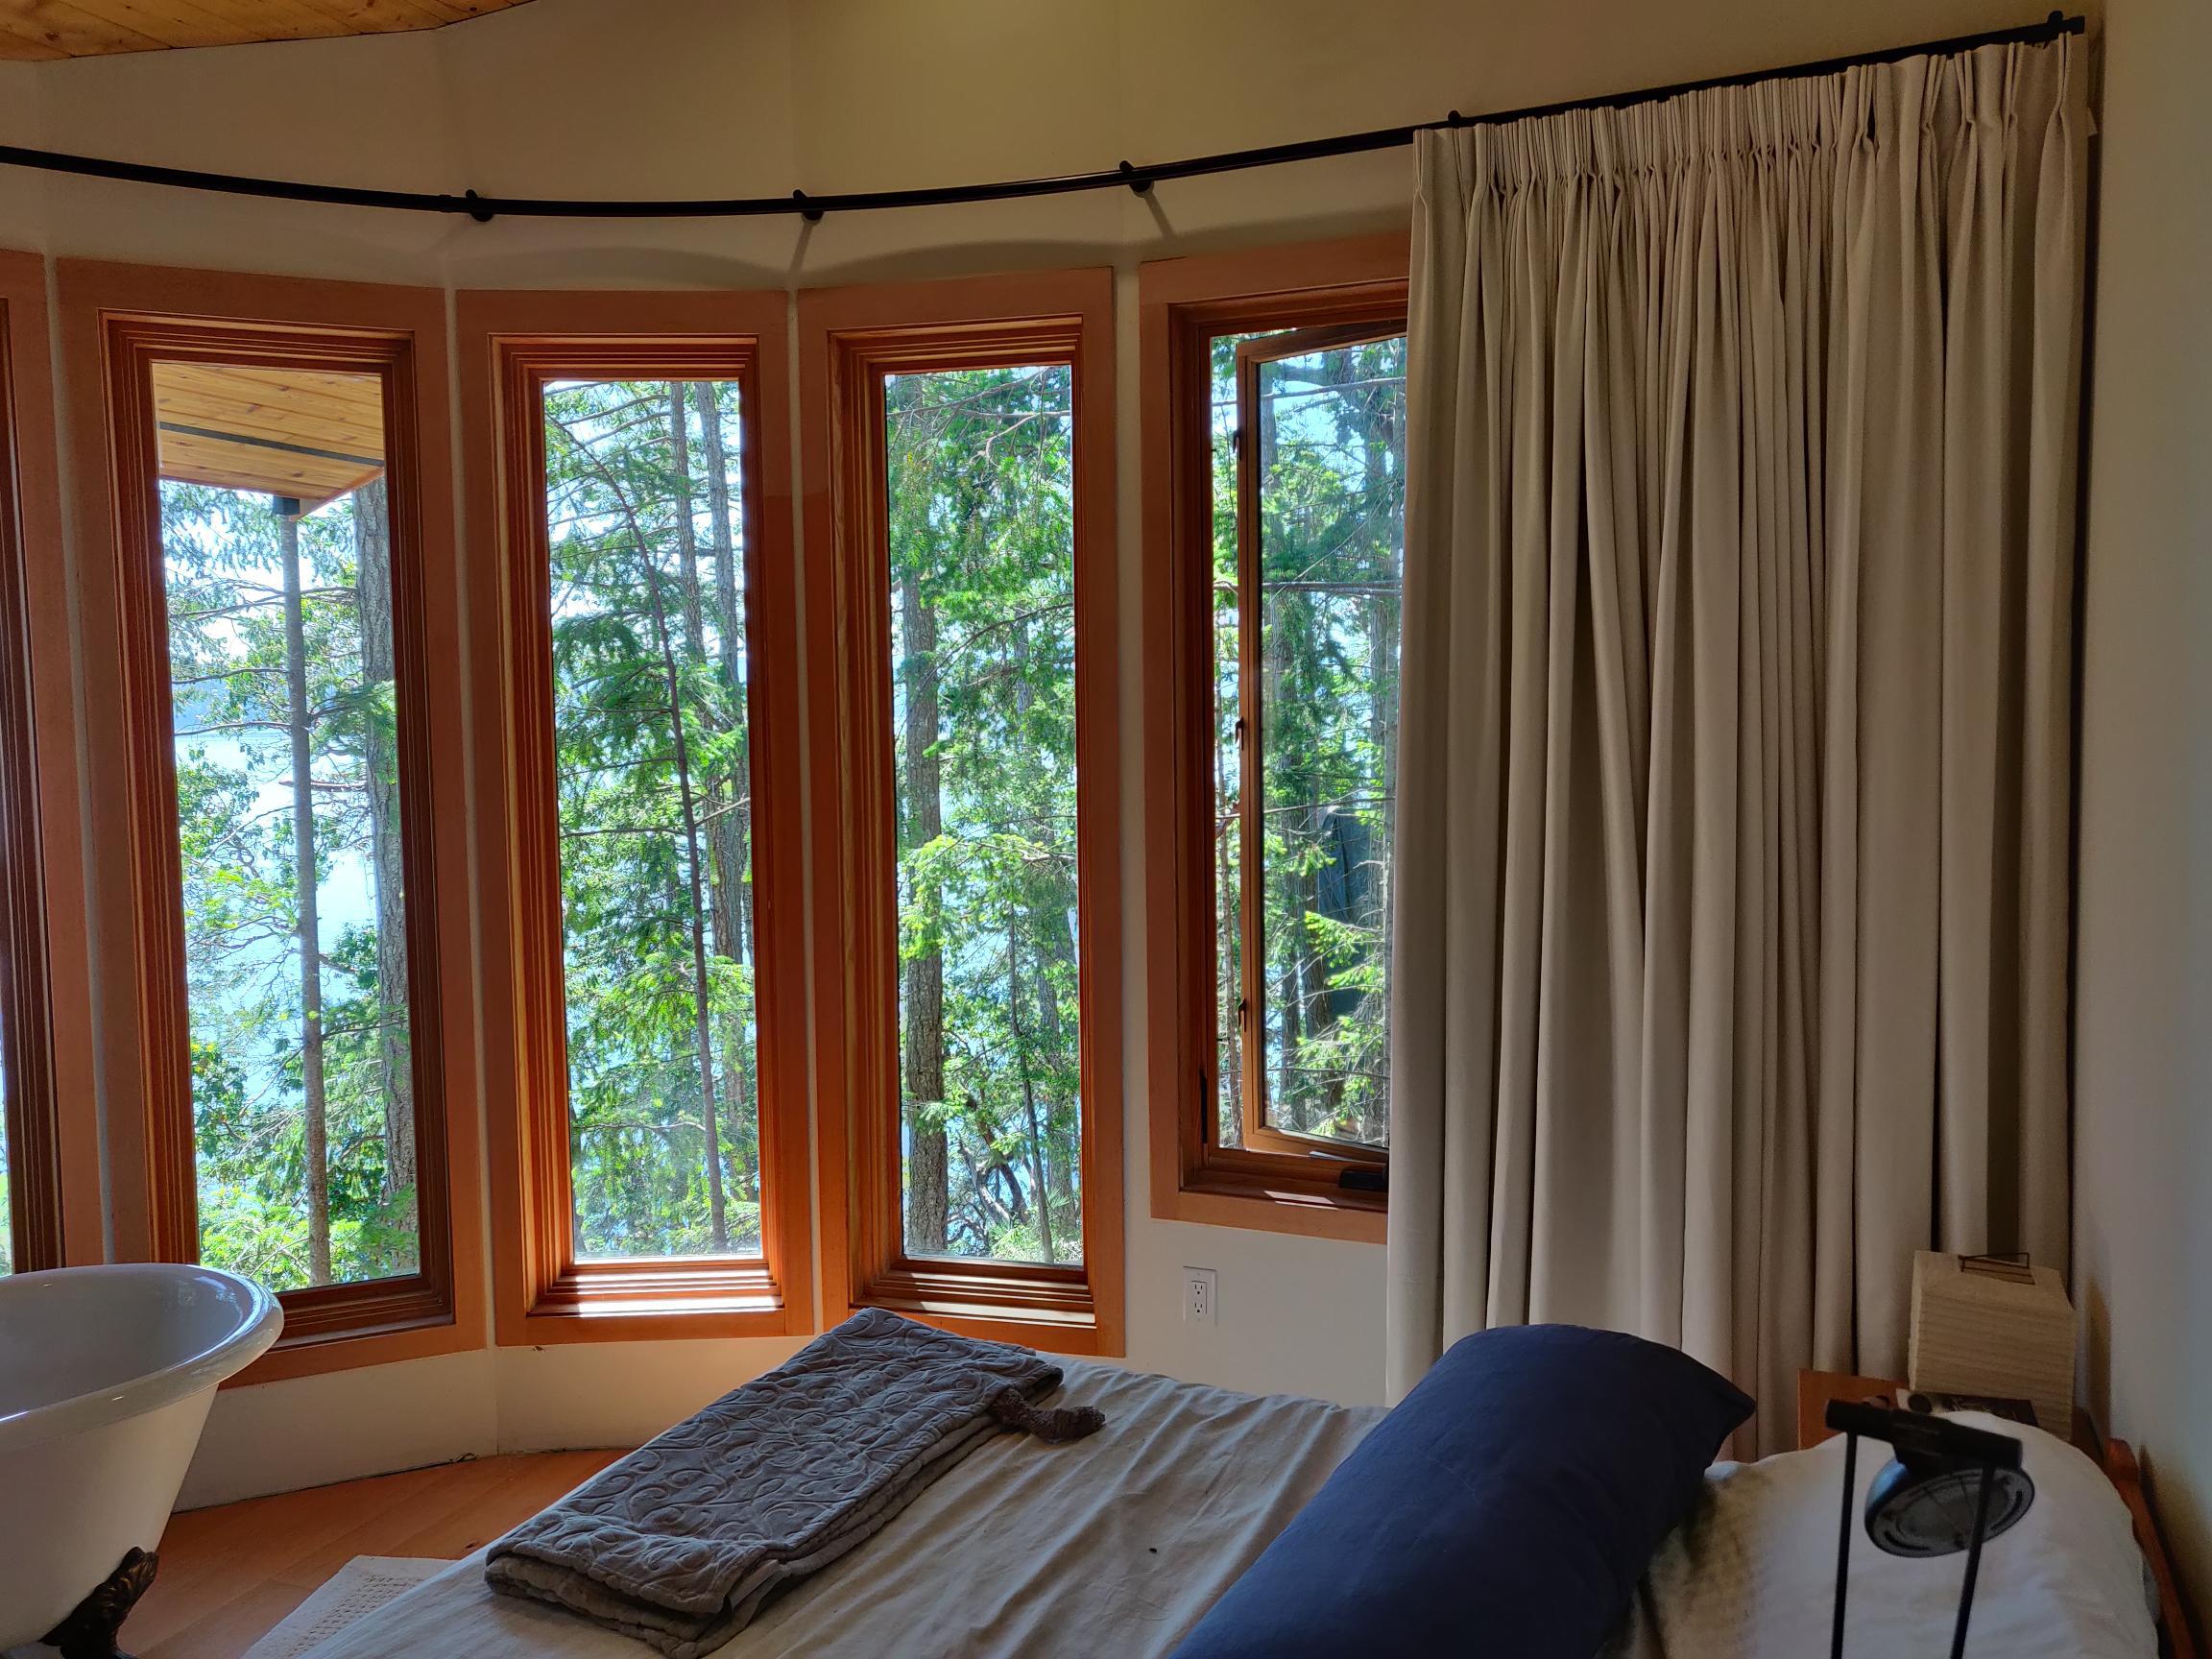 Resort Style Custom Drapery Budget Blinds of Comox Valley and Campbell River Courtenay (250)338-8564